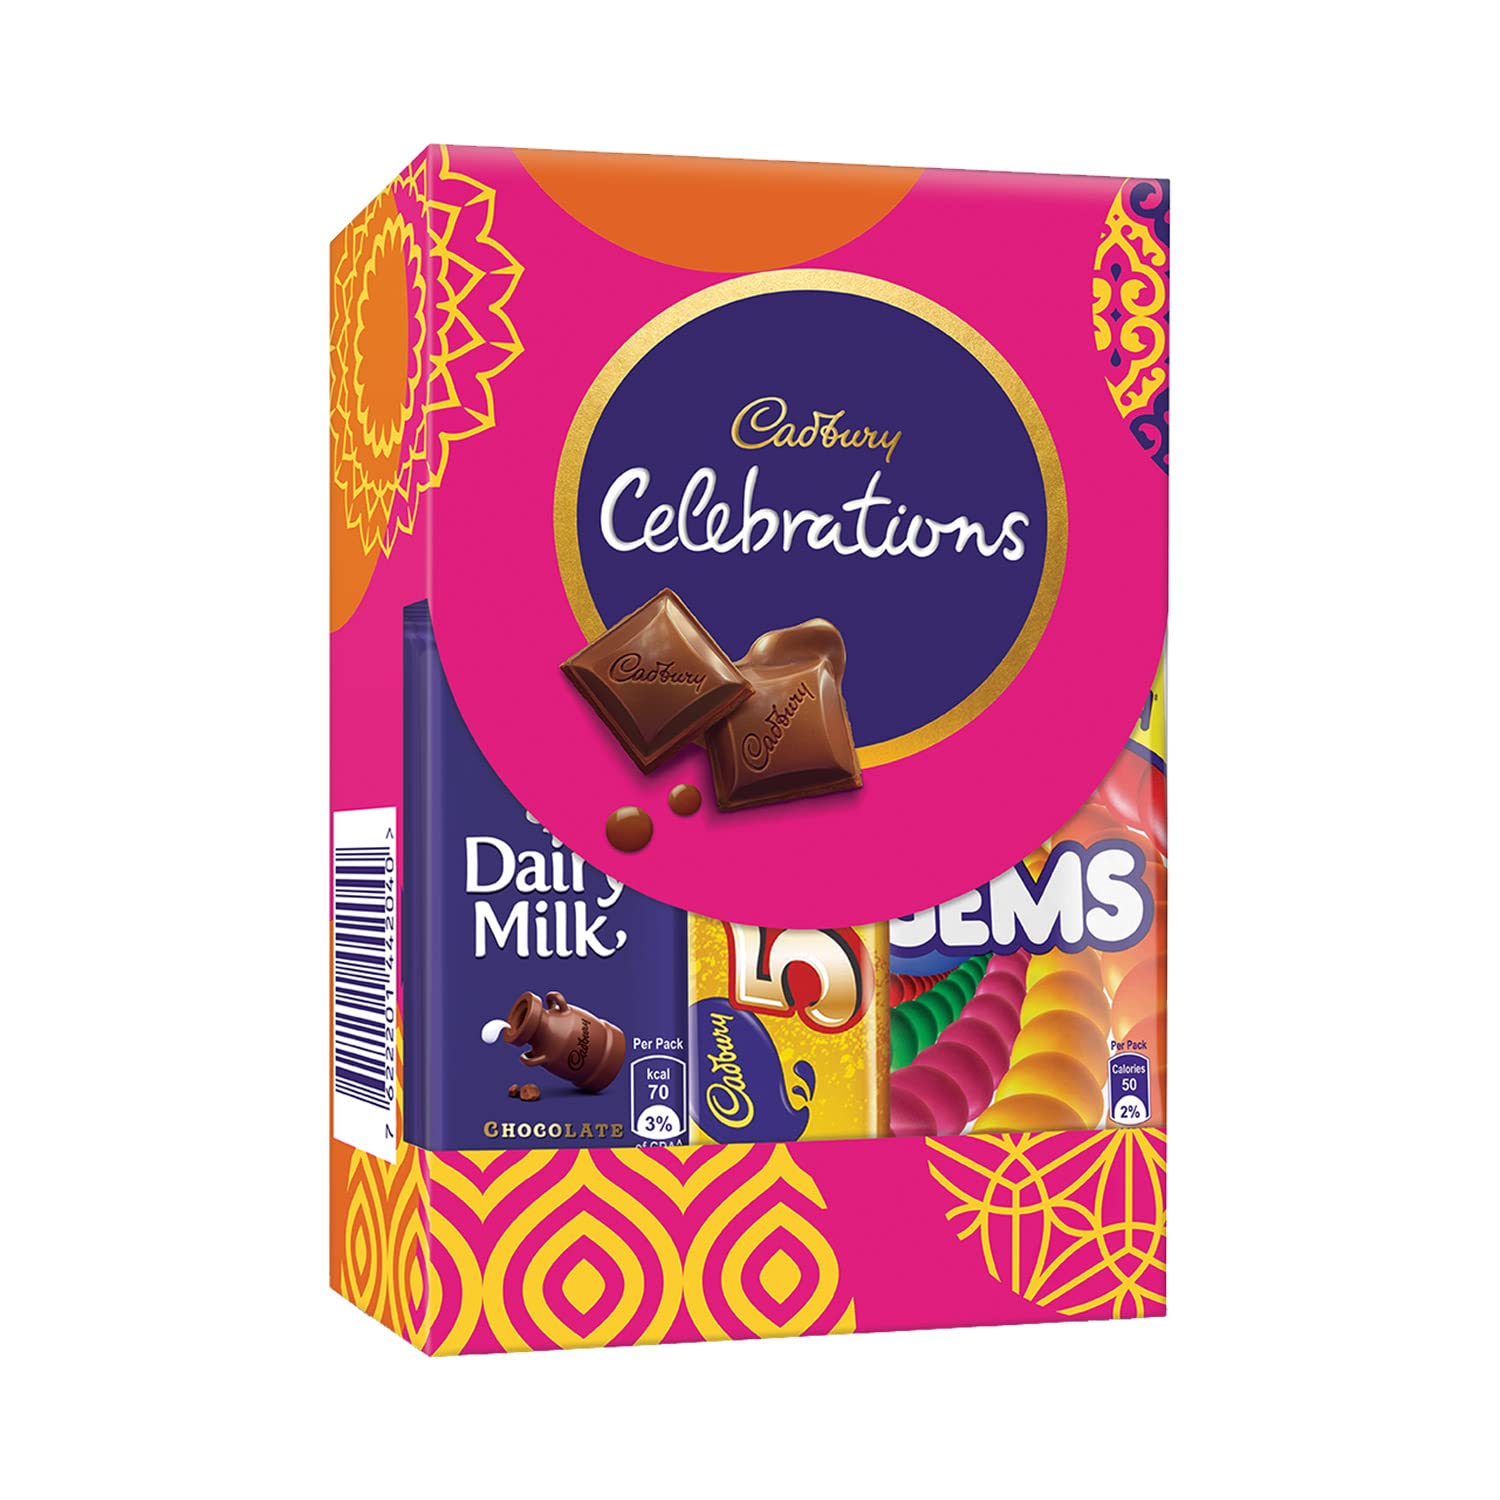 Buy Cadbury Celebrations Assorted Chocolate Gift Pack 183.6 Gm - Pack of 2  from Samanonspot at best price